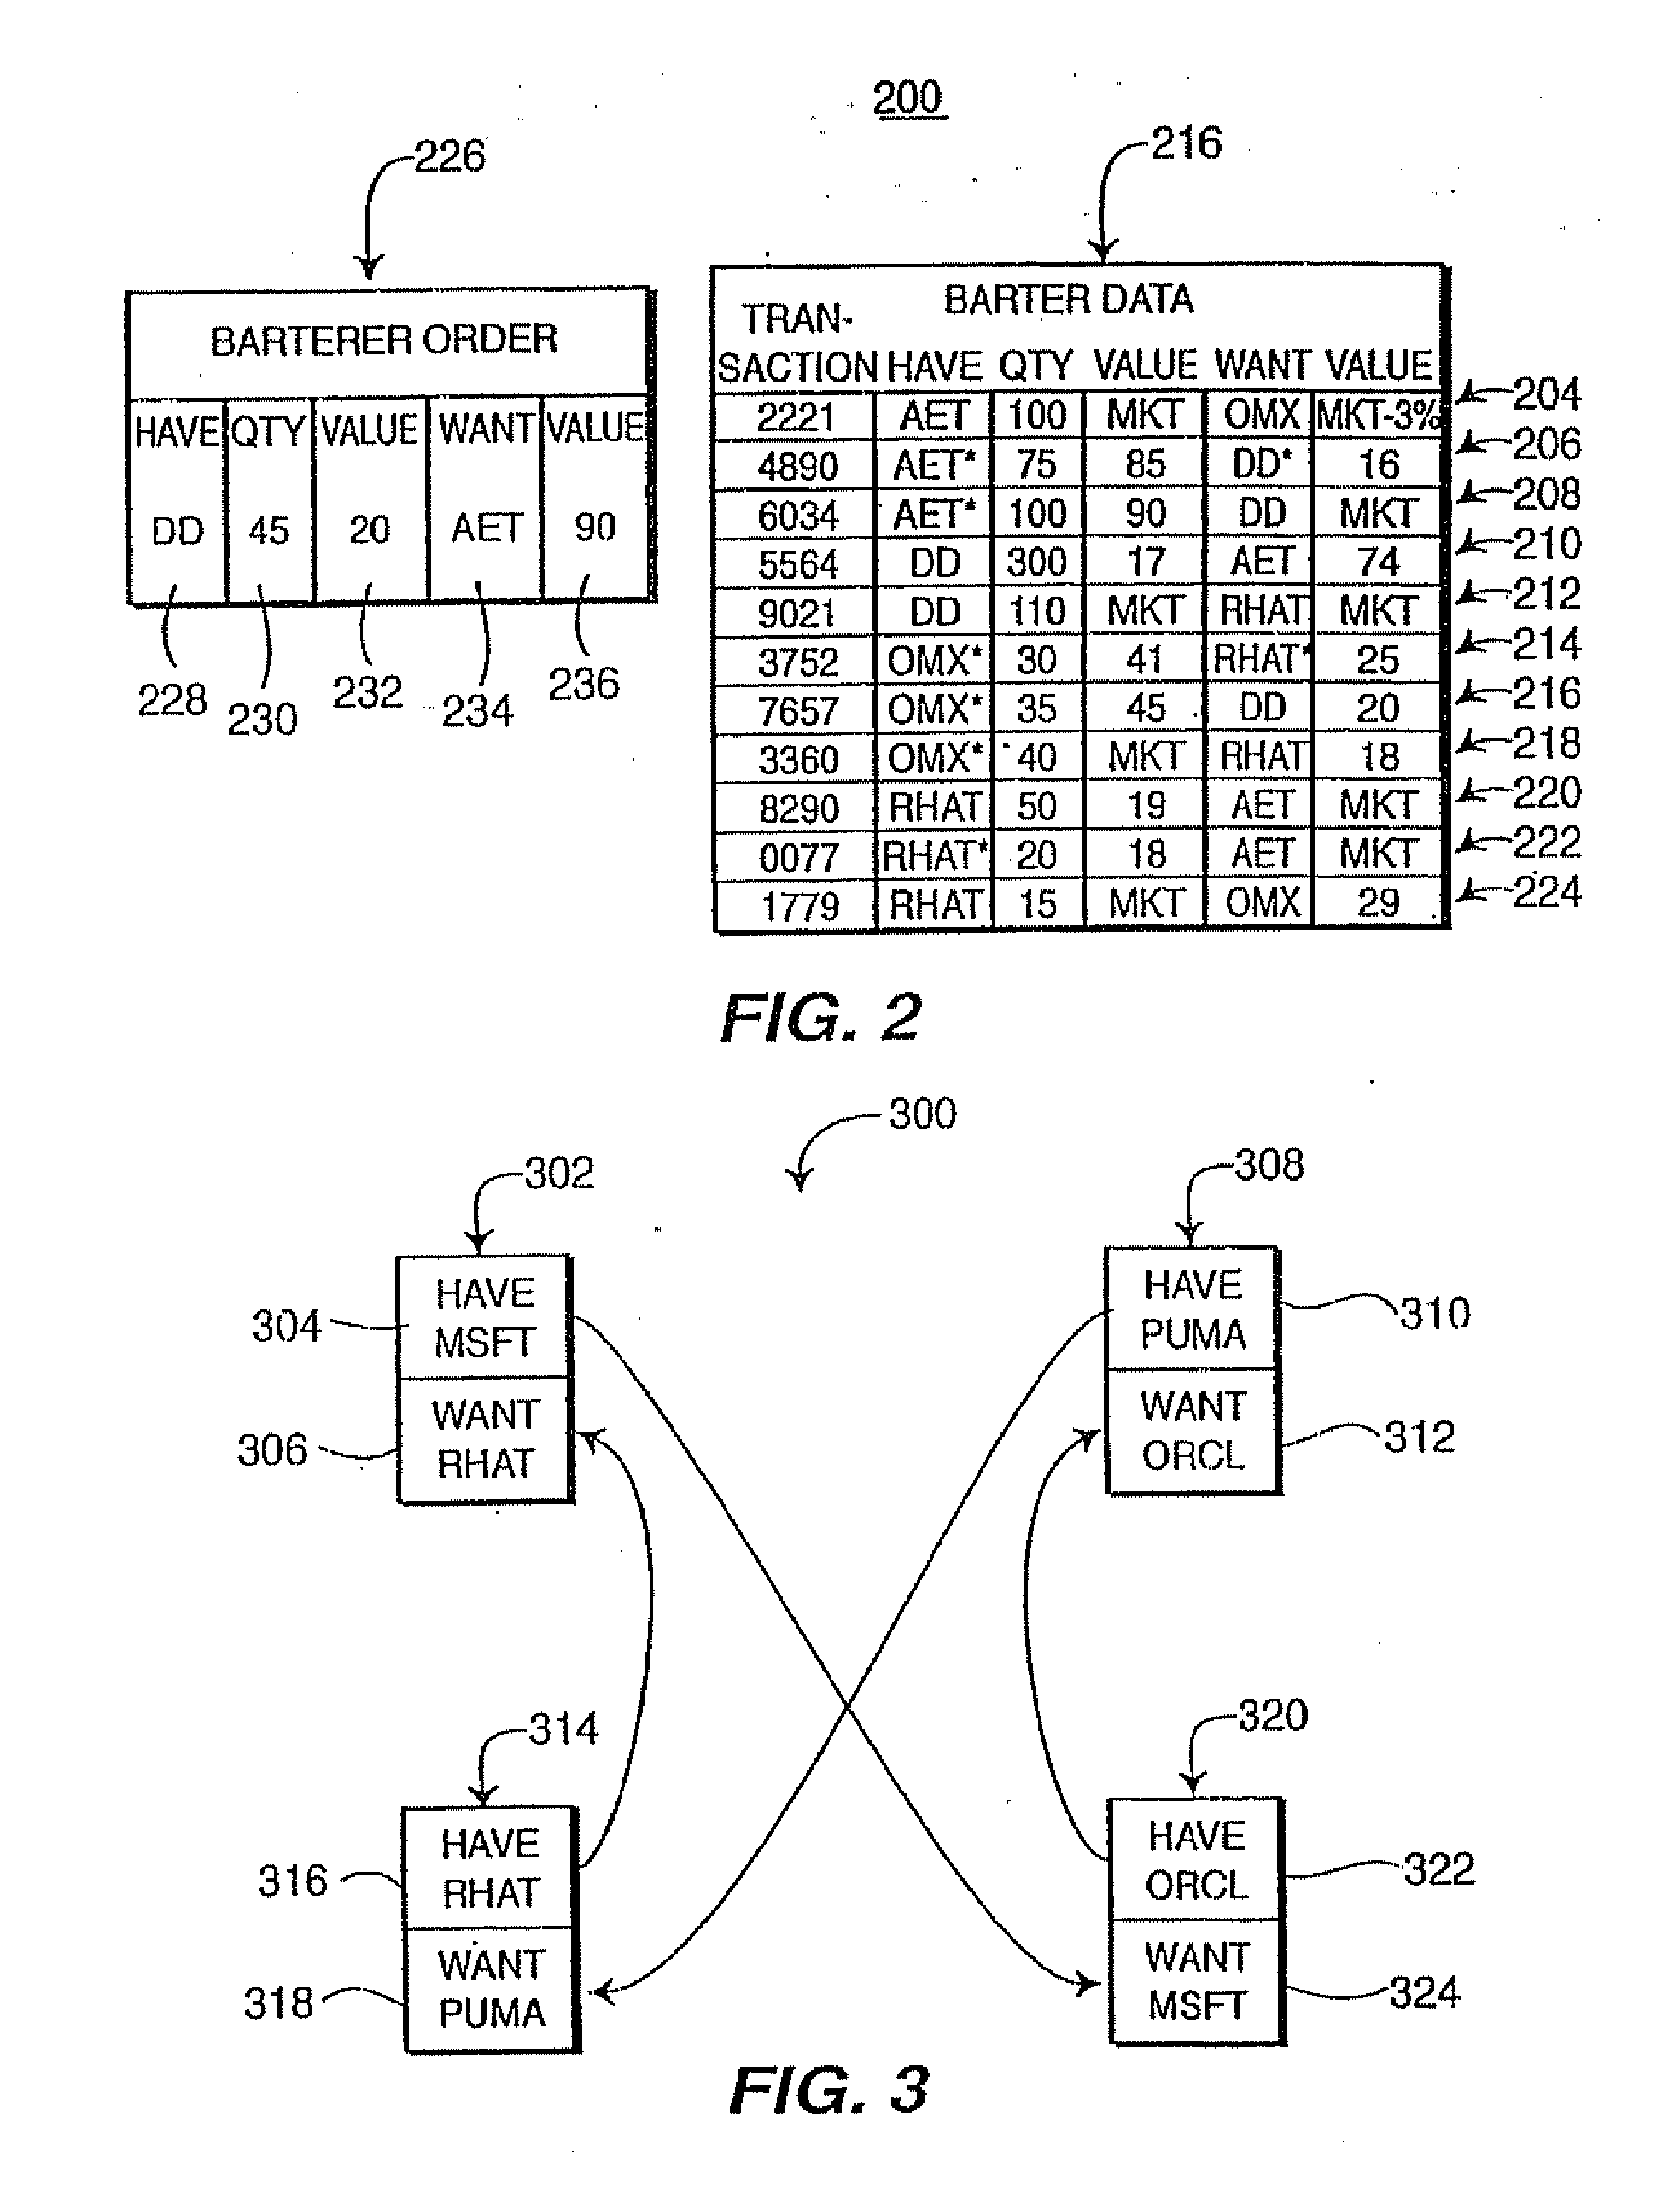 Electronic Bartering System with Facilitating Tools